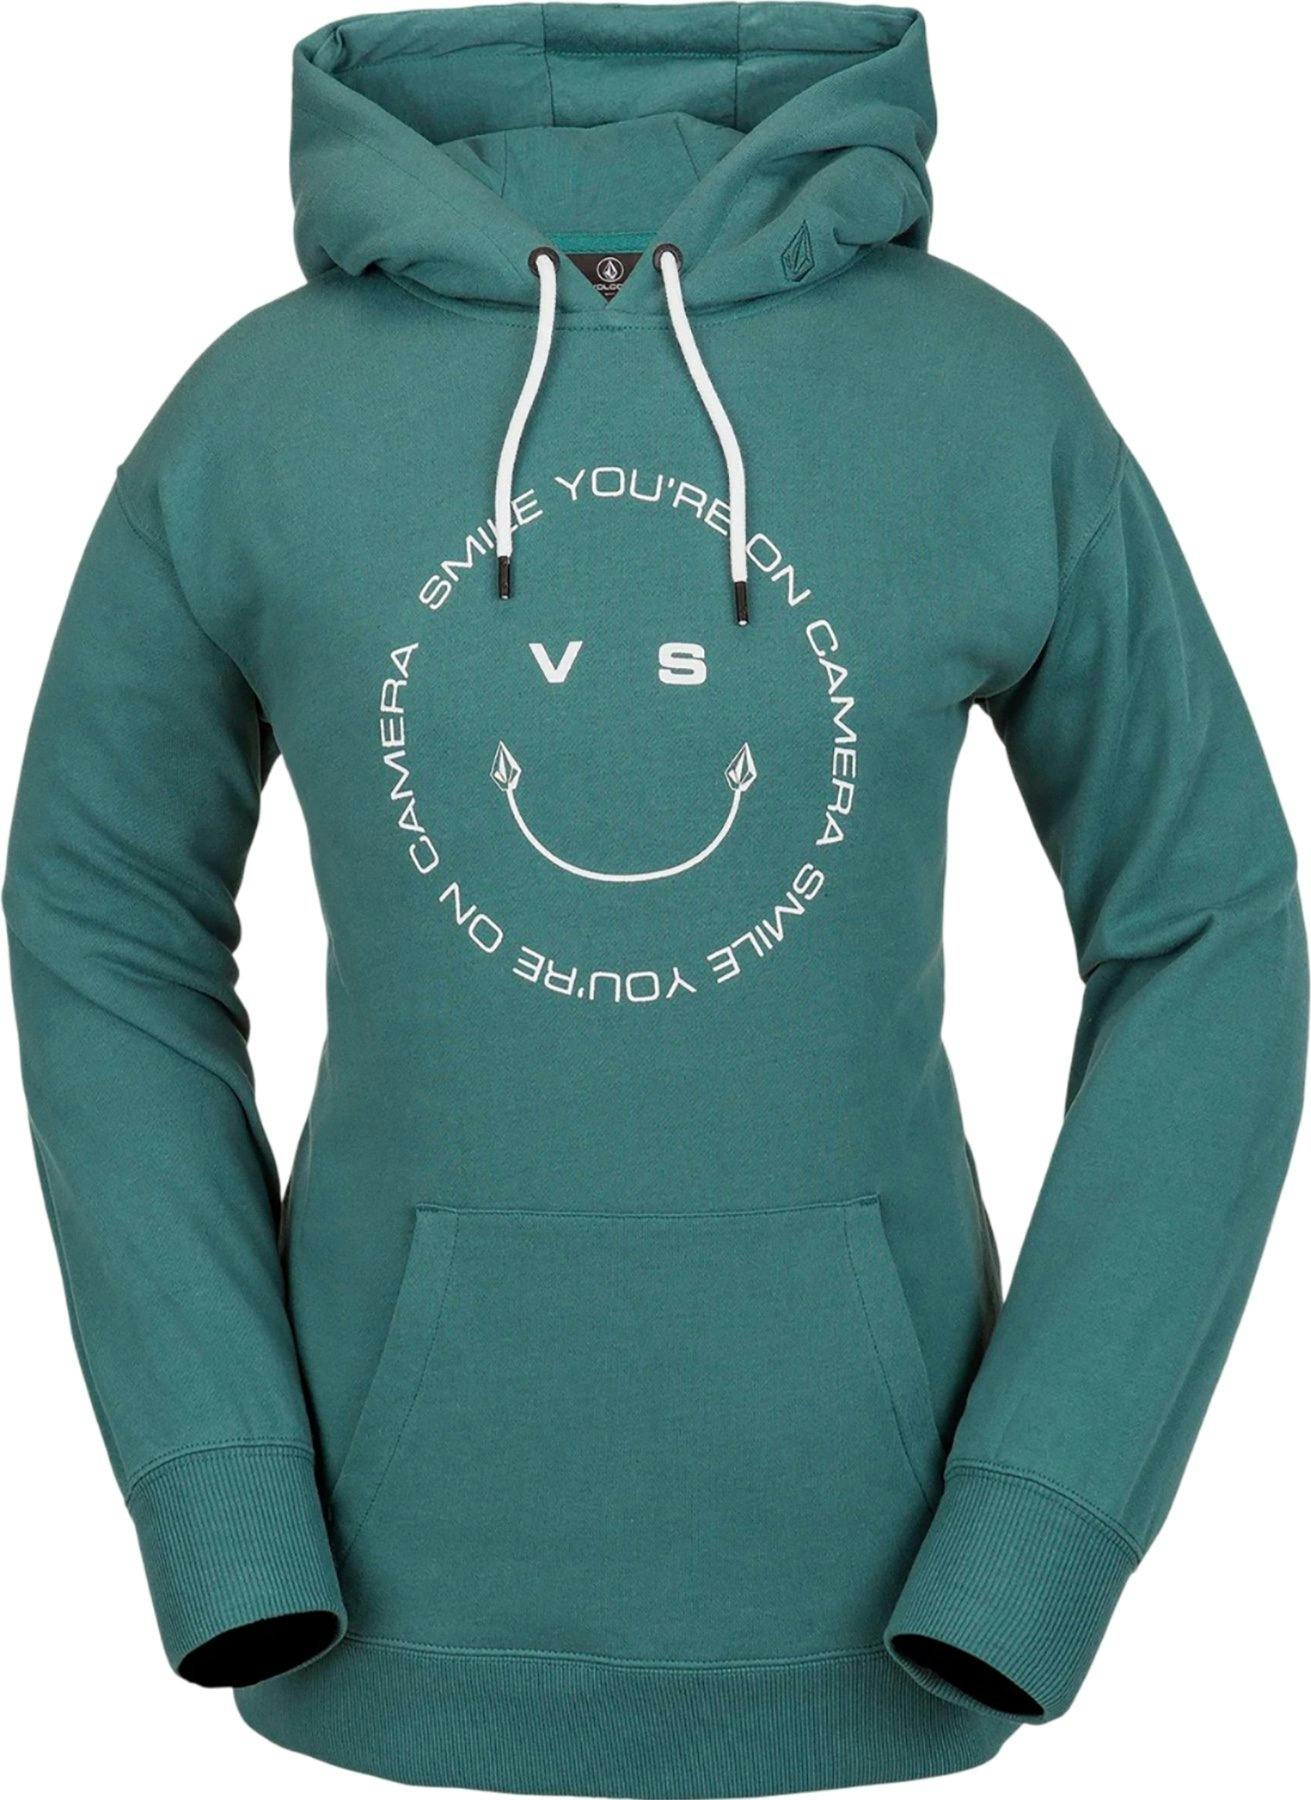 Product image for Costus Hoodie - Women's